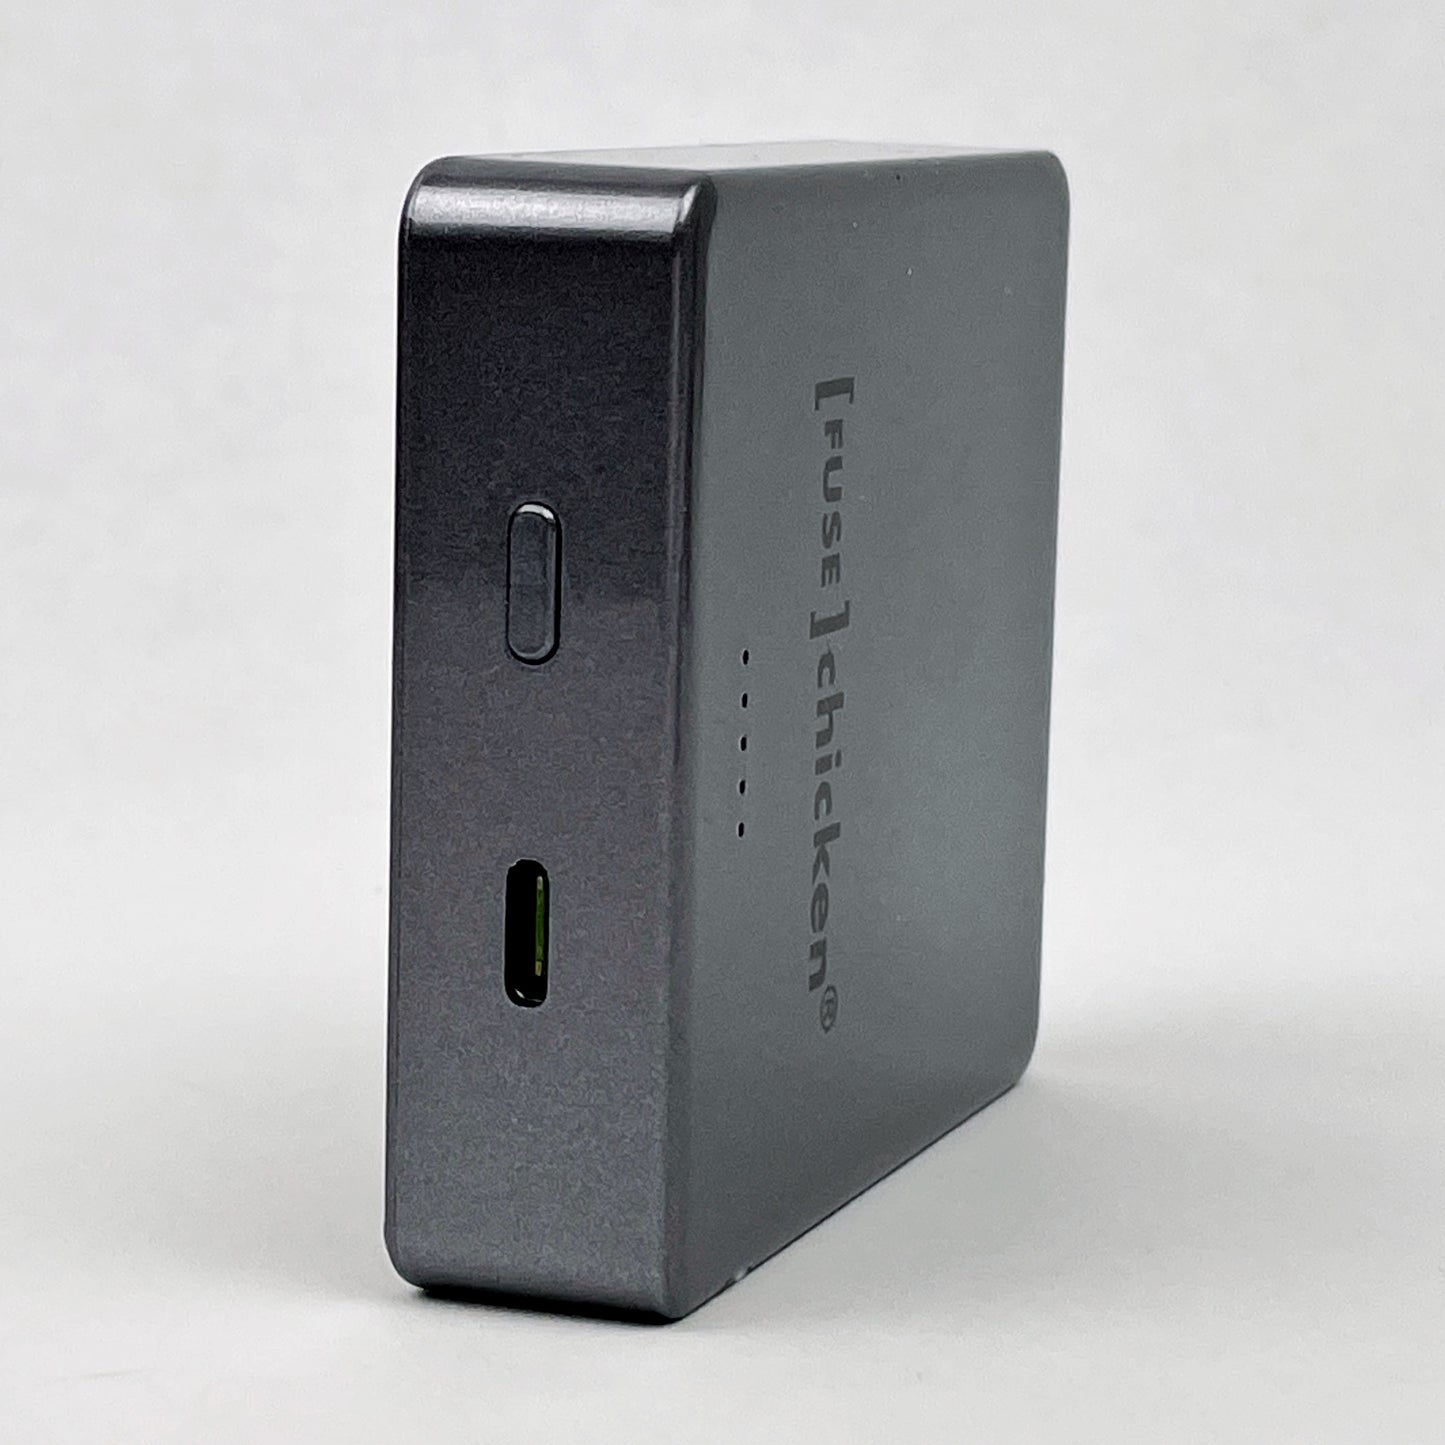 ClickCharge MagSafe Wireless PowerBank